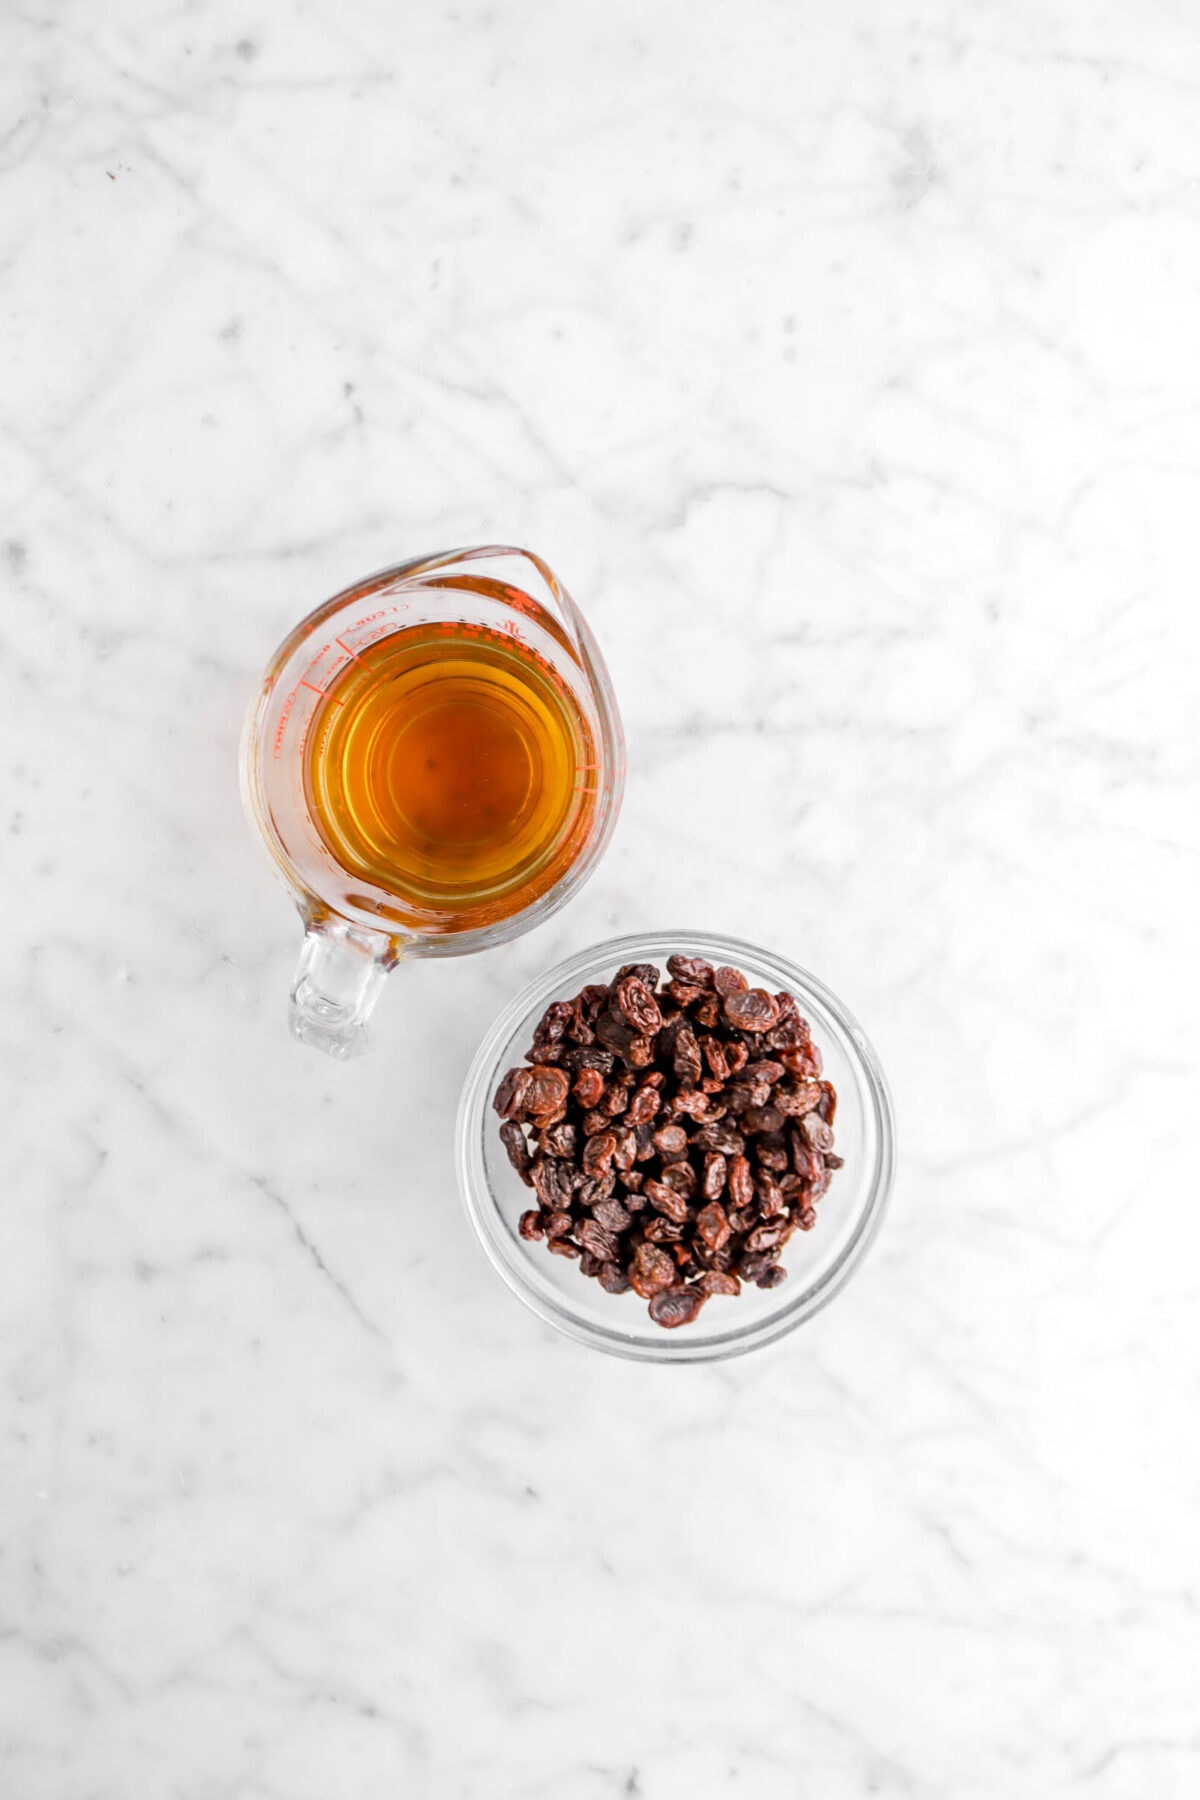 rum and raisins on marble counter